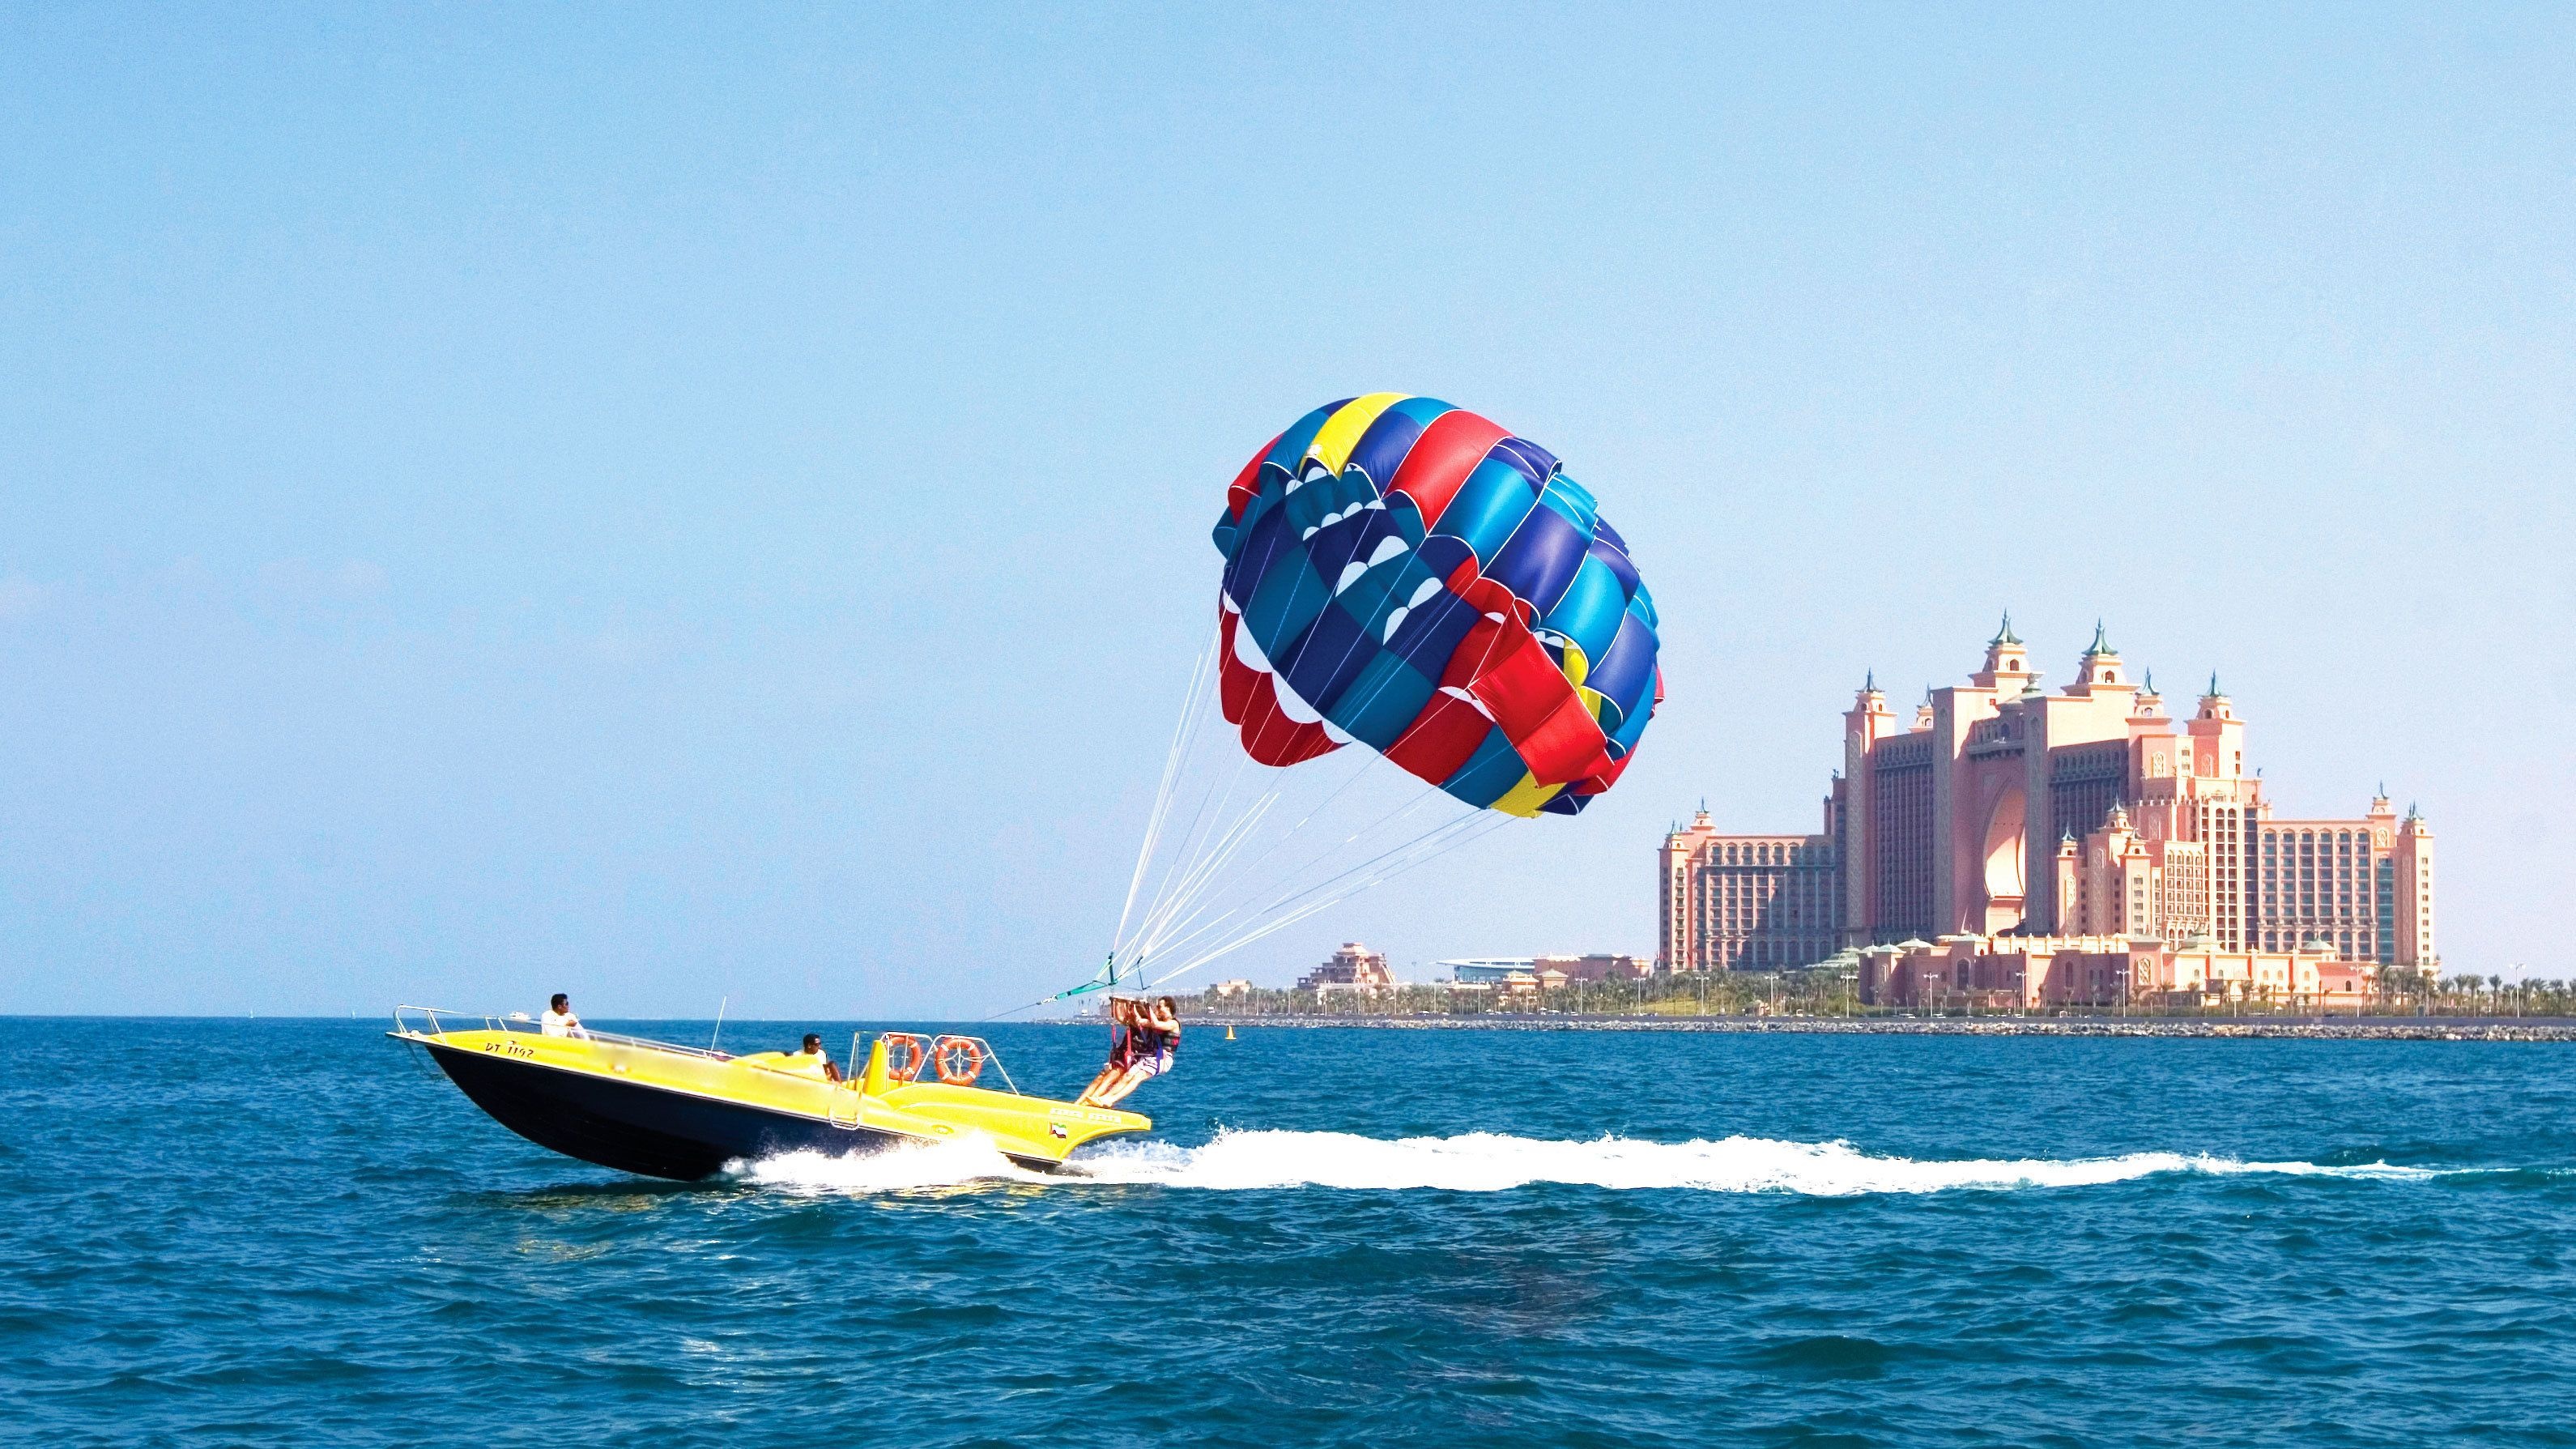 Parasailing: A parasail wing, A harness, A parascender, Behind the boat, Parachute. 3190x1790 HD Background.